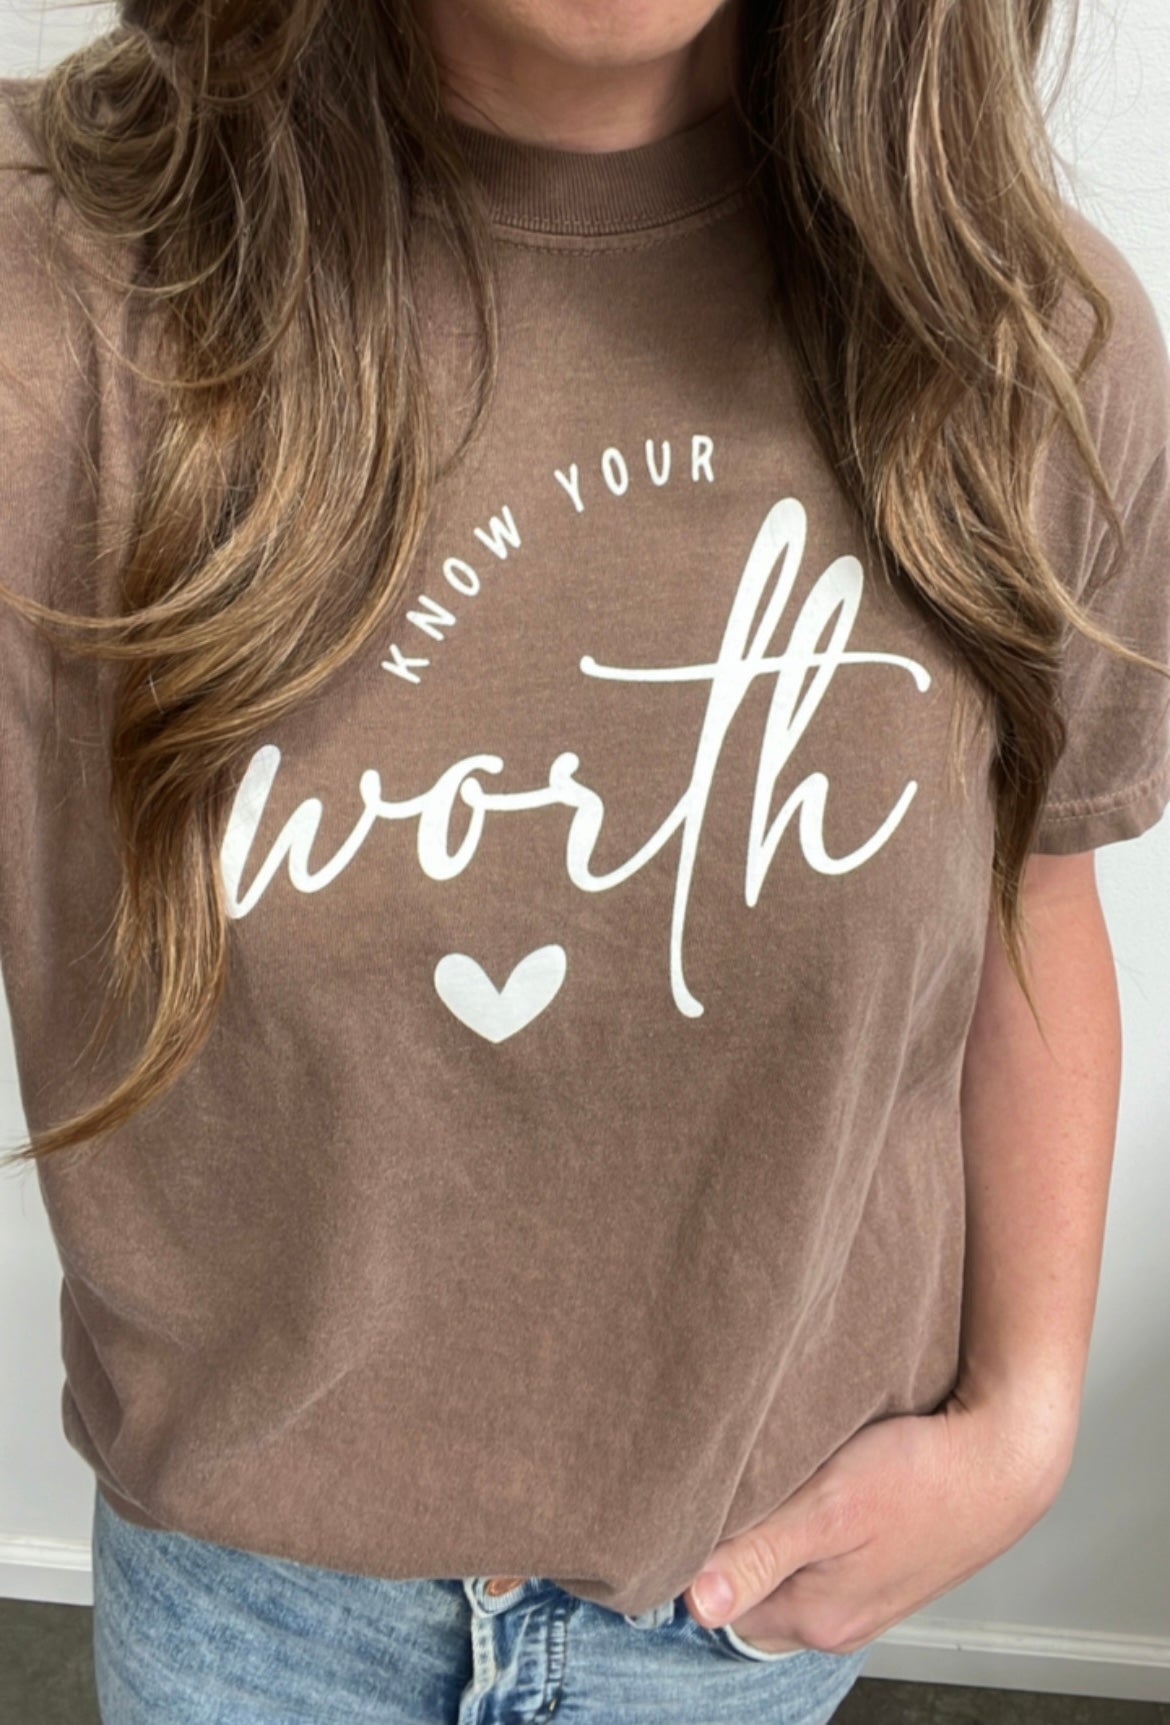 Know your worth T Shirt